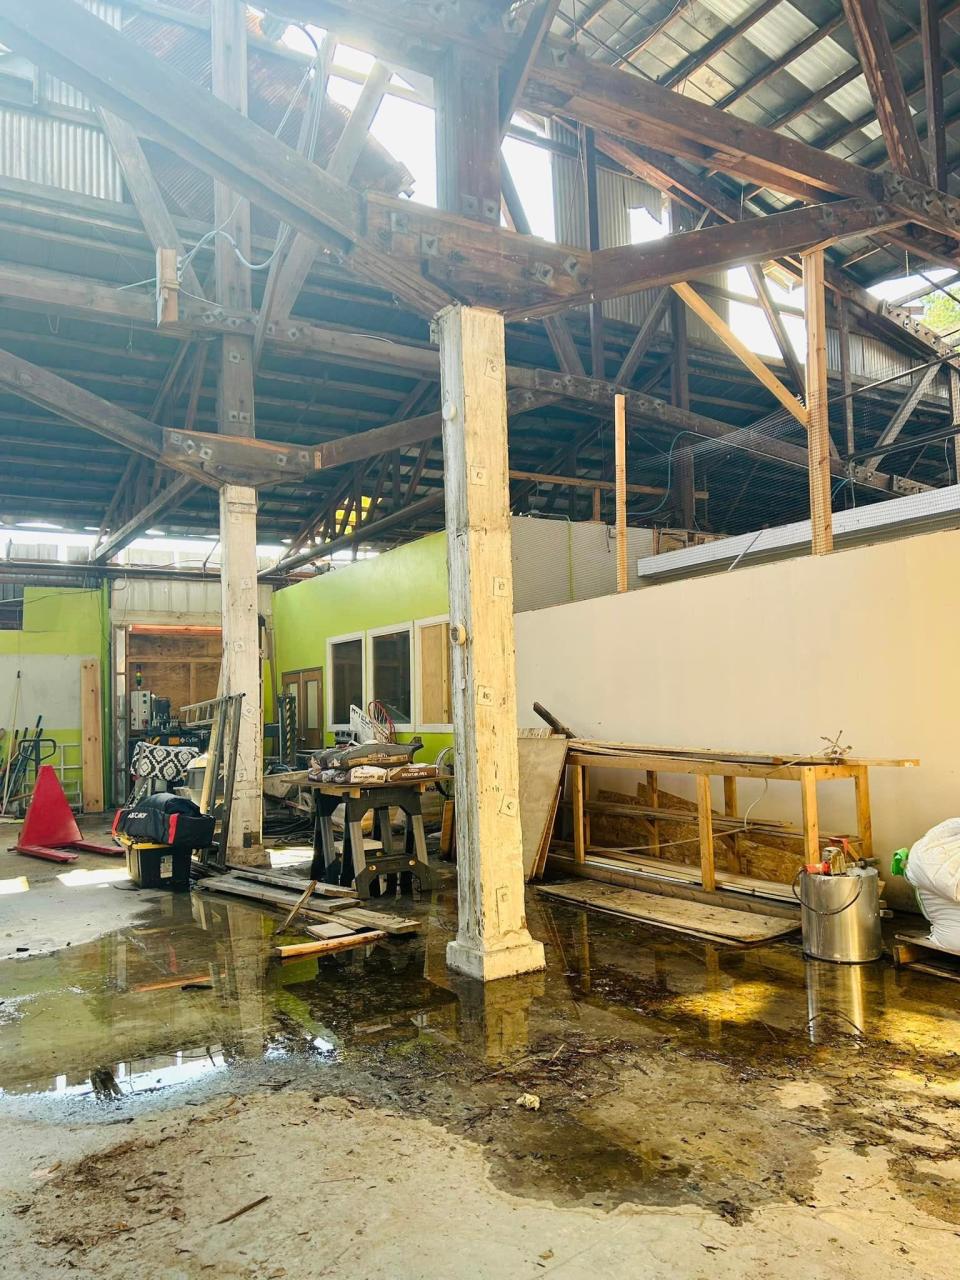 Interior shot the home base for Gulf Coast Additive Manufacturing & Design and Precision Building and Design, both businesses of Kyndra and James Light. The small business took hit when a tornado slammed into Railroad Square Art Park.